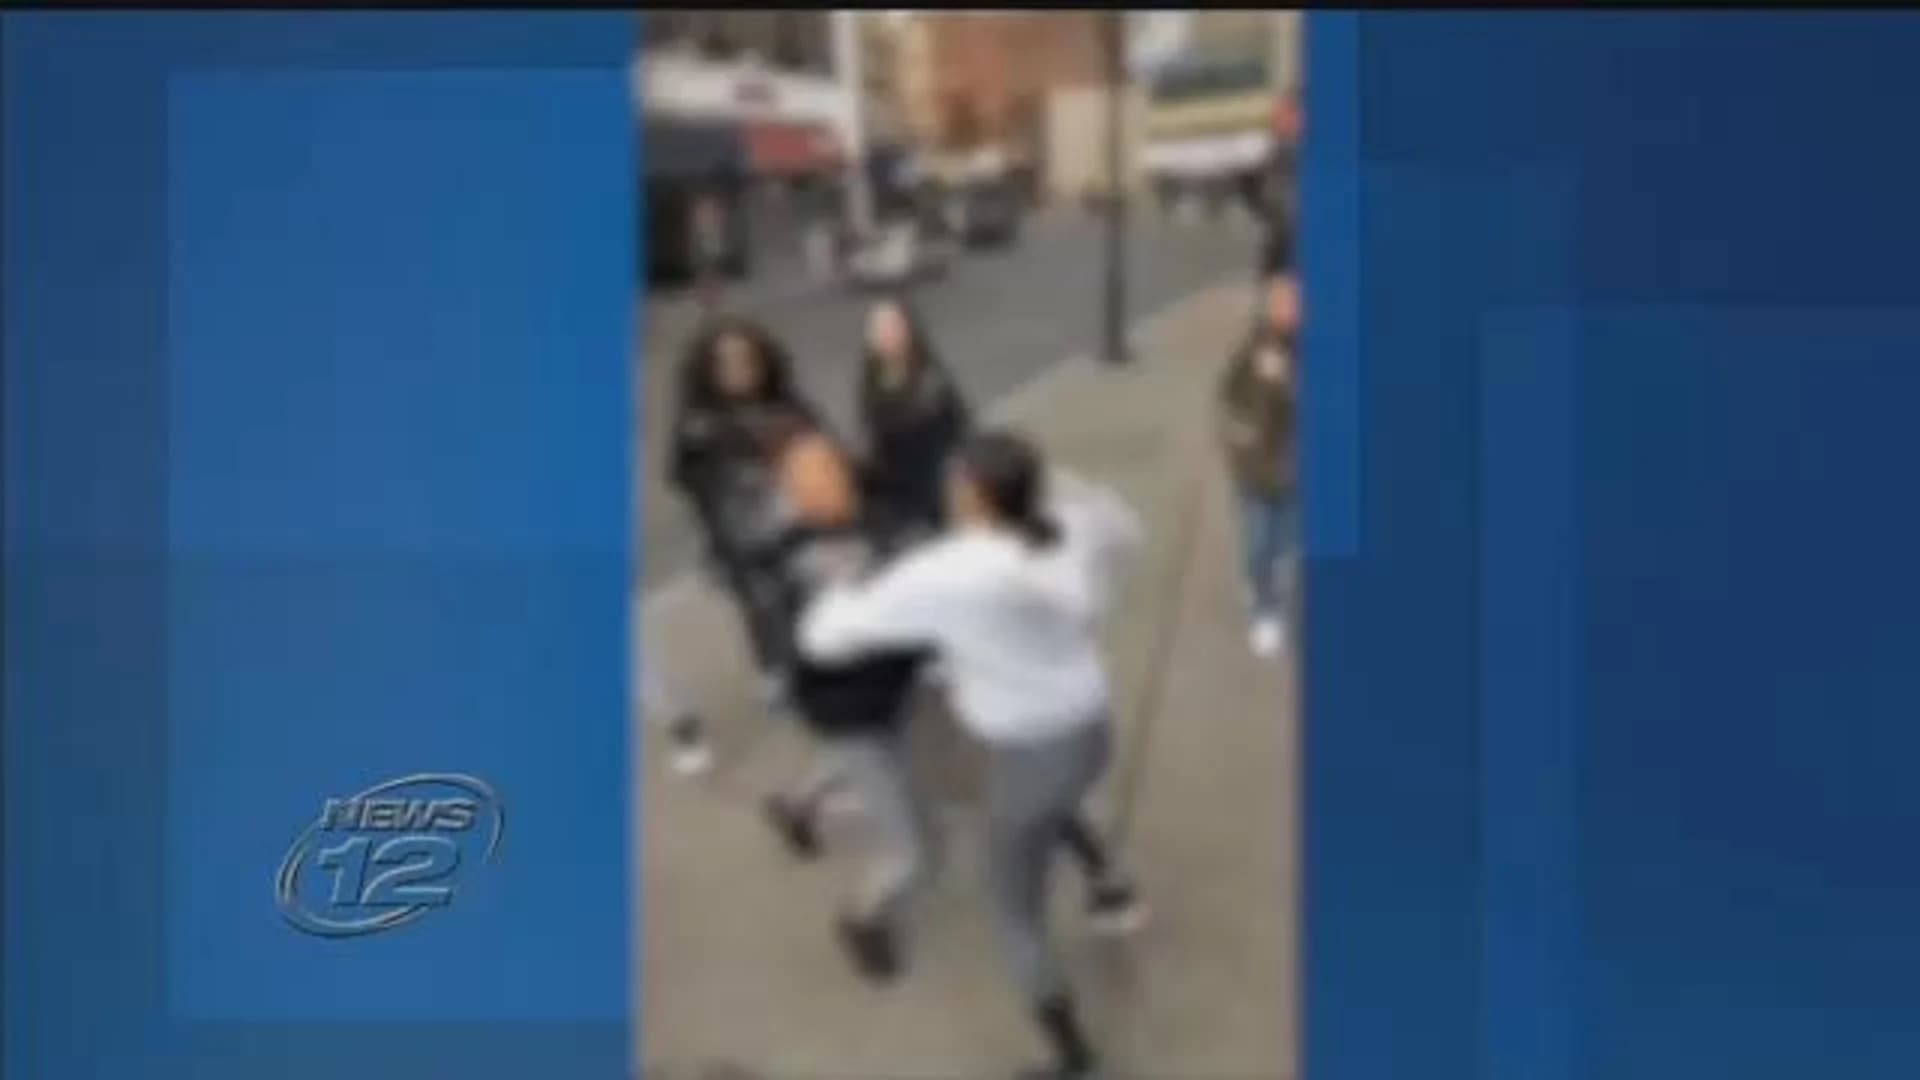 Cellphone video shows wild brawl in Getty Square, 2 teens arrested